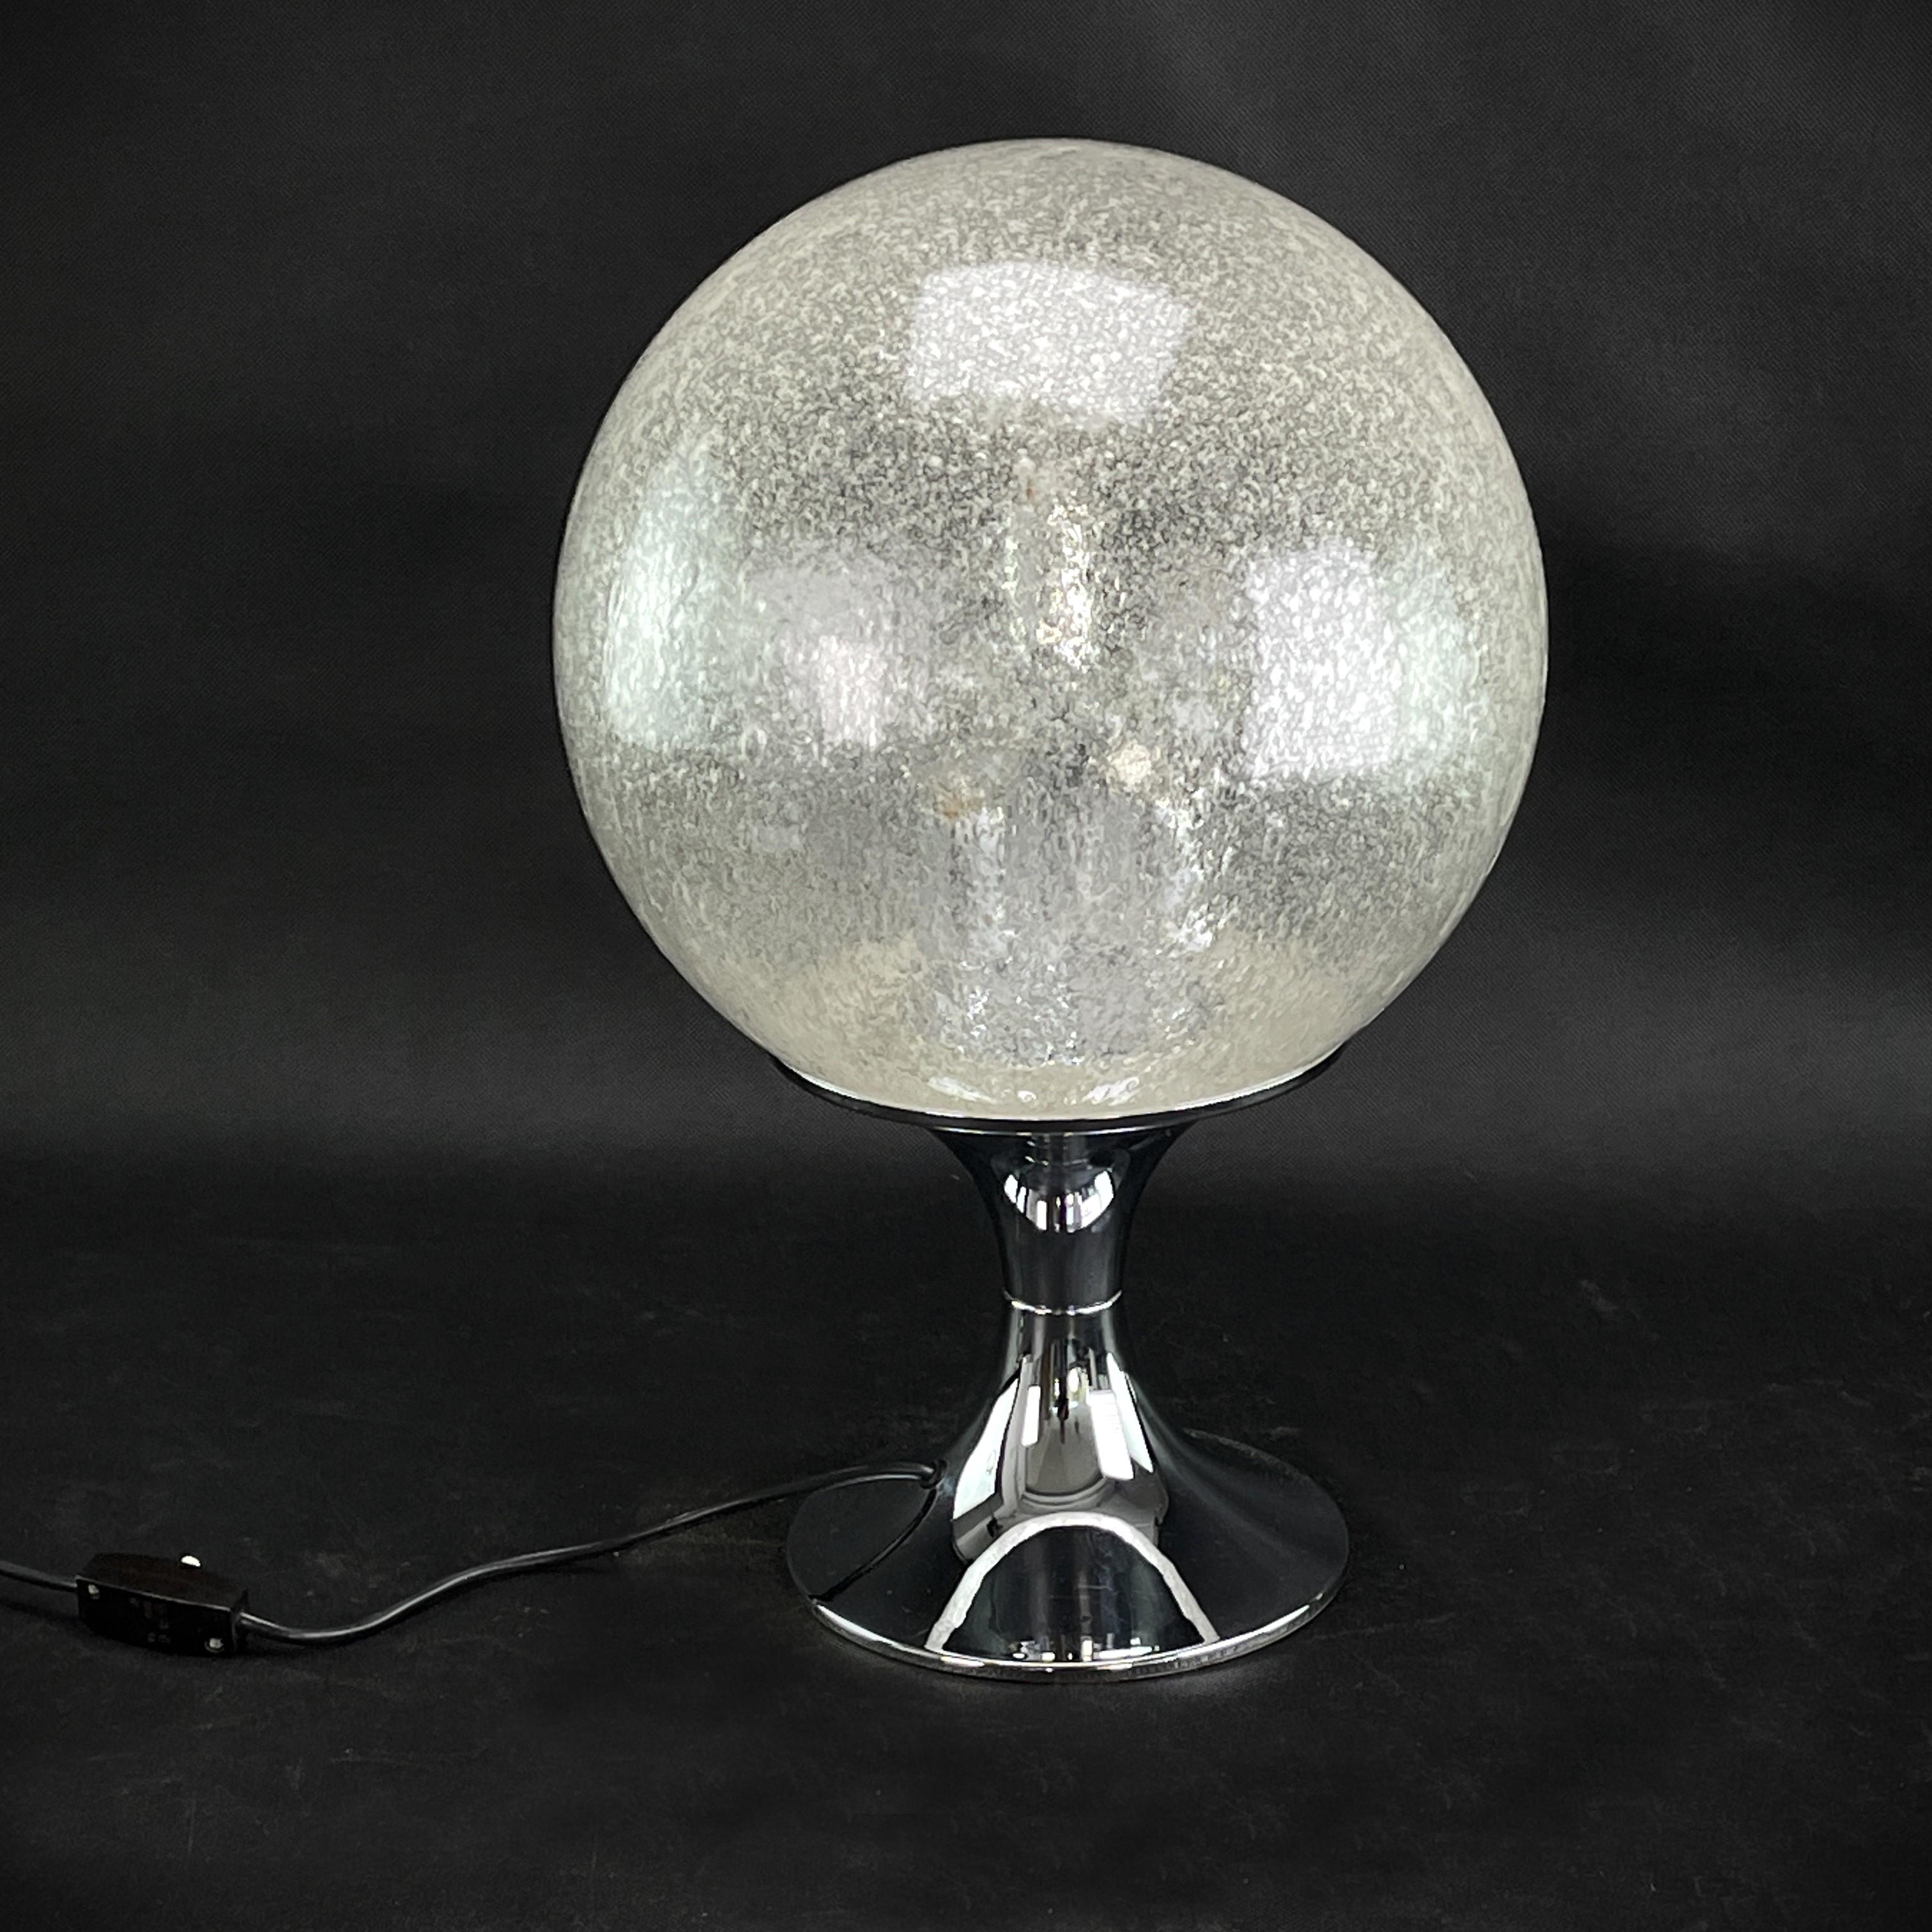 table lamp with big glass ball

The beautiful and rare lamp is a true design classic from the 60s. This lamp in the extraordinary design is a highlight for any lounge interior of the Panton-Eames era. This vintage lamp is an original and gives a